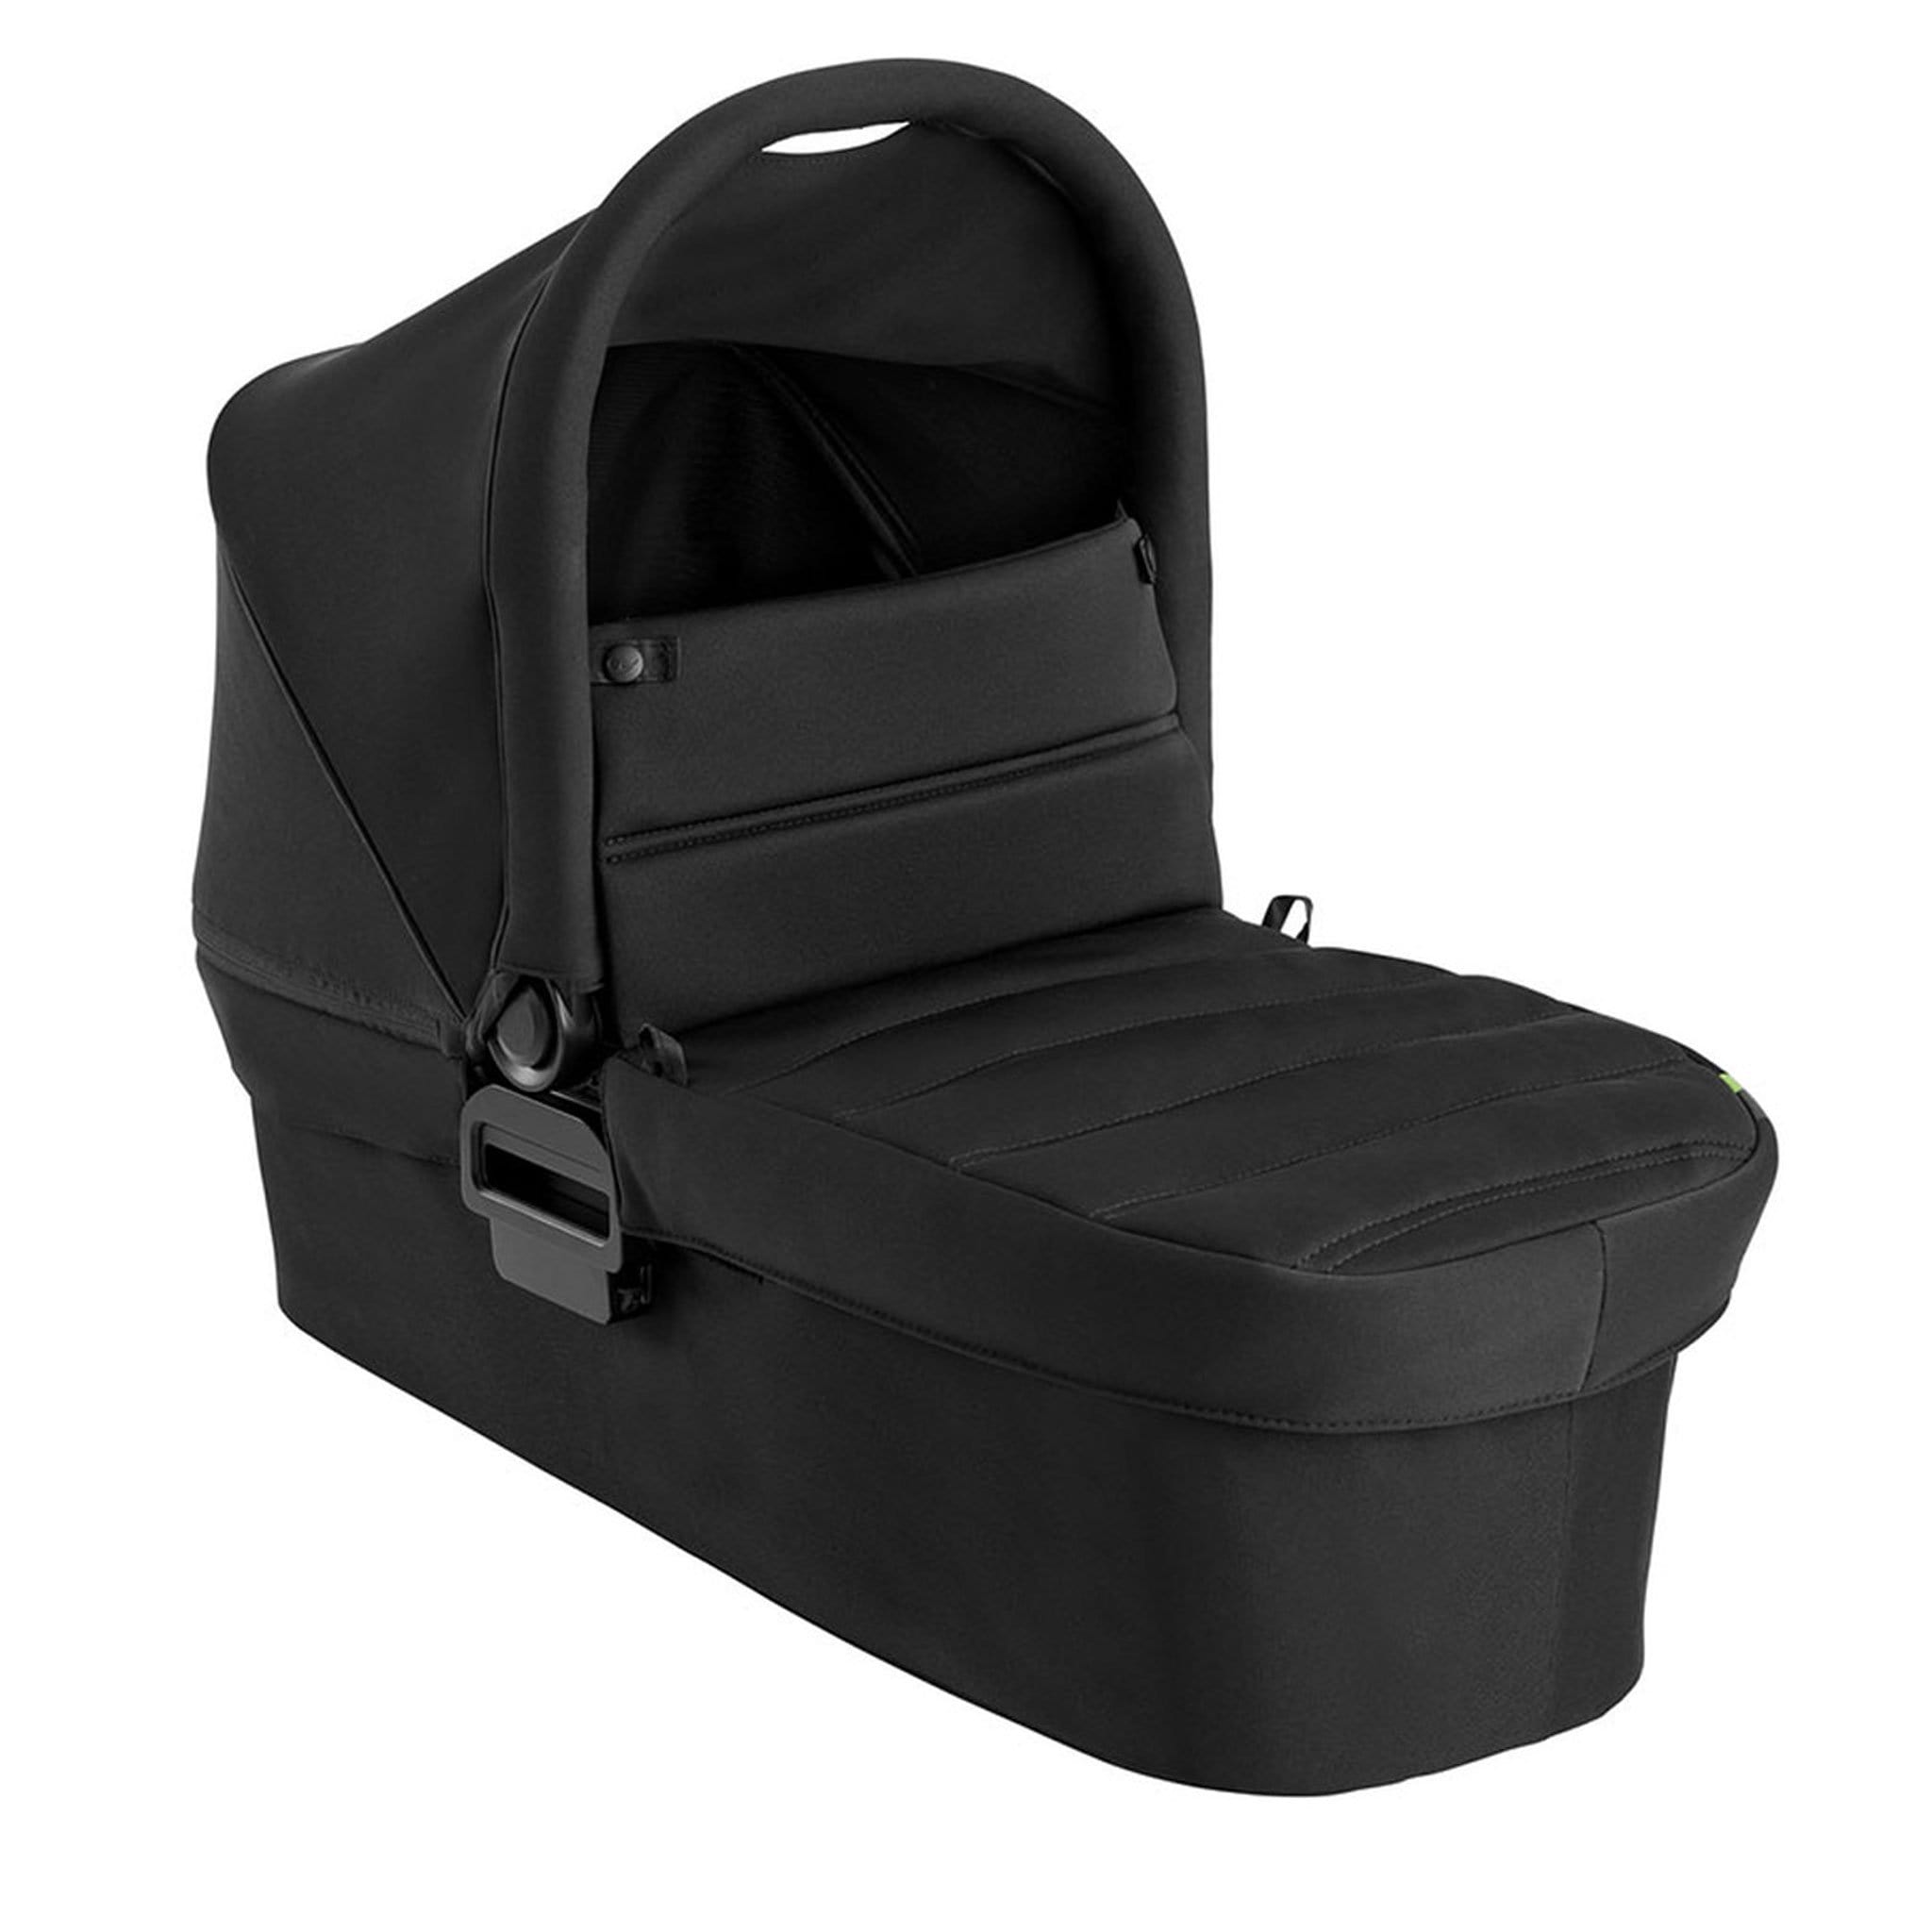 Baby Jogger City Mini 2 Carrycot Opulent Black Chassis & Carrycots 2149201 0047406179237